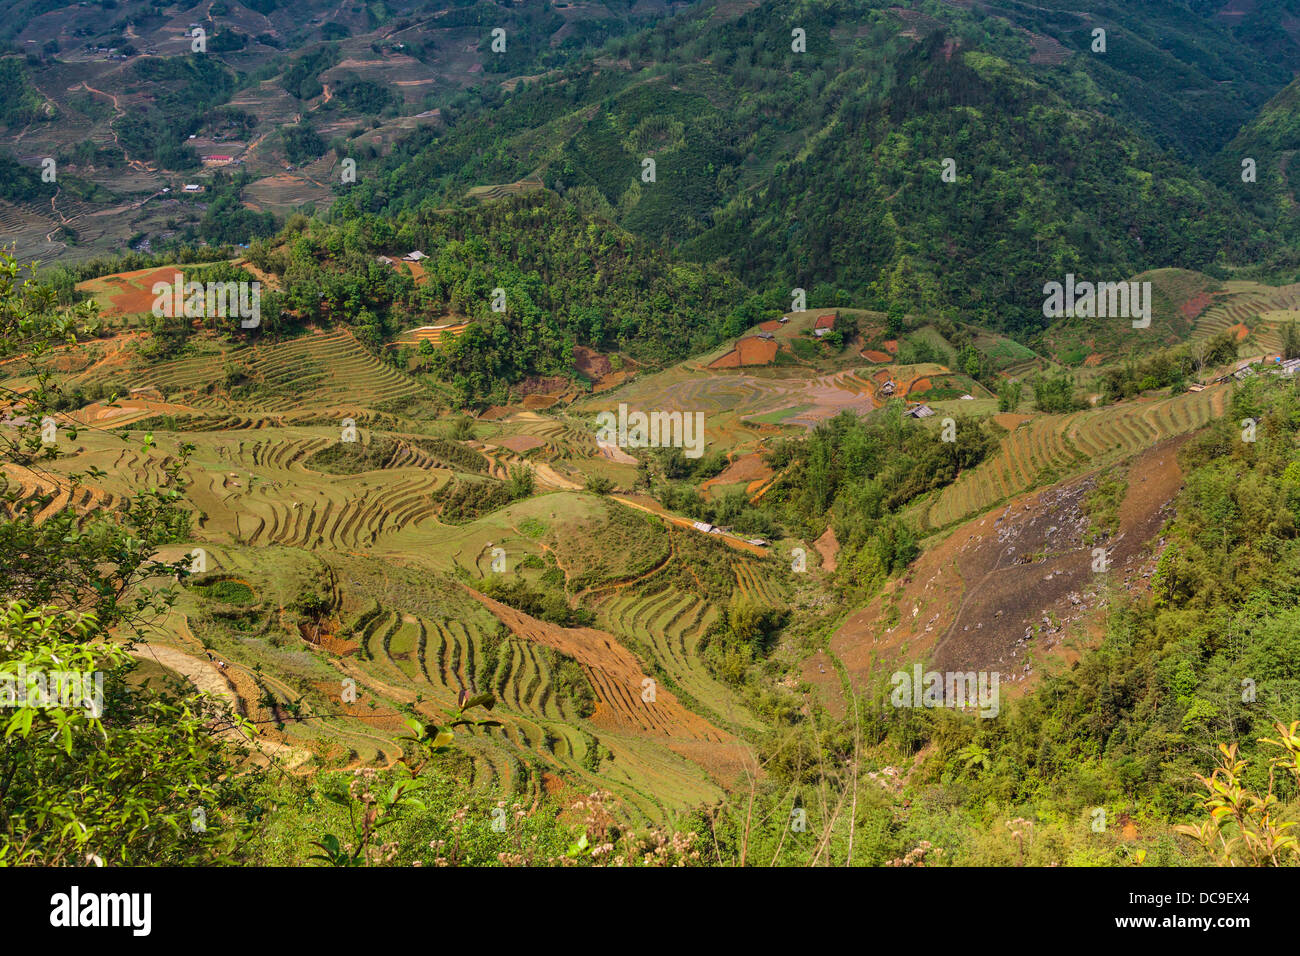 Terraced rice fields in Cat Cat Village in the Muong Hoa valley near Sapa, Vietnam, Asia. Stock Photo